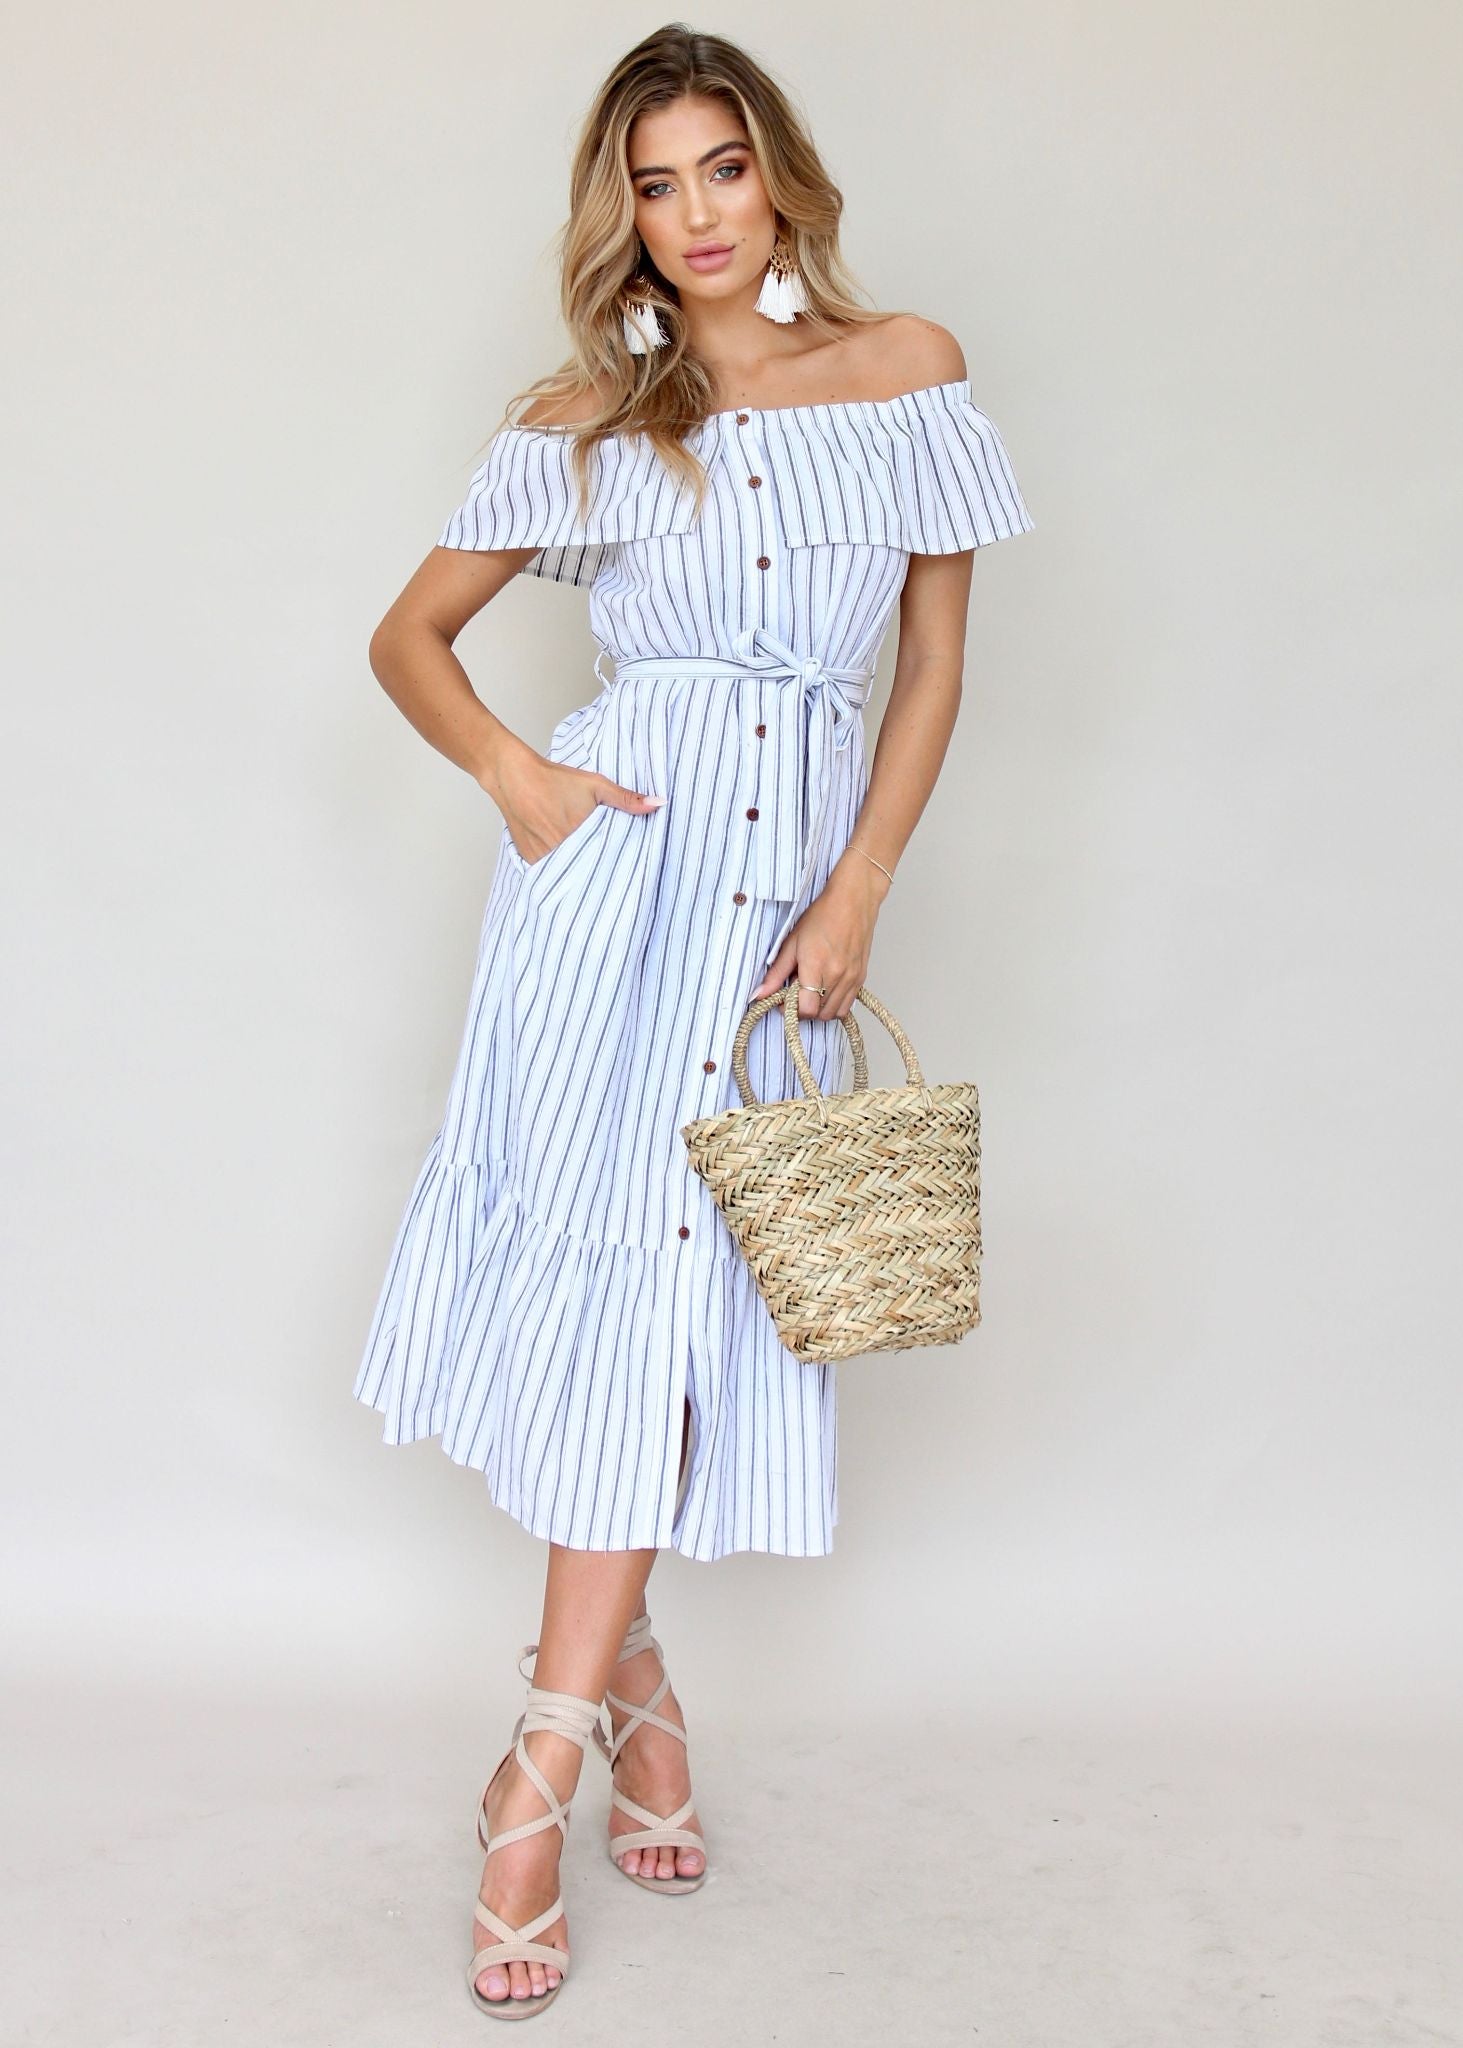 NEW ARRIVALS | Gingham and Heels